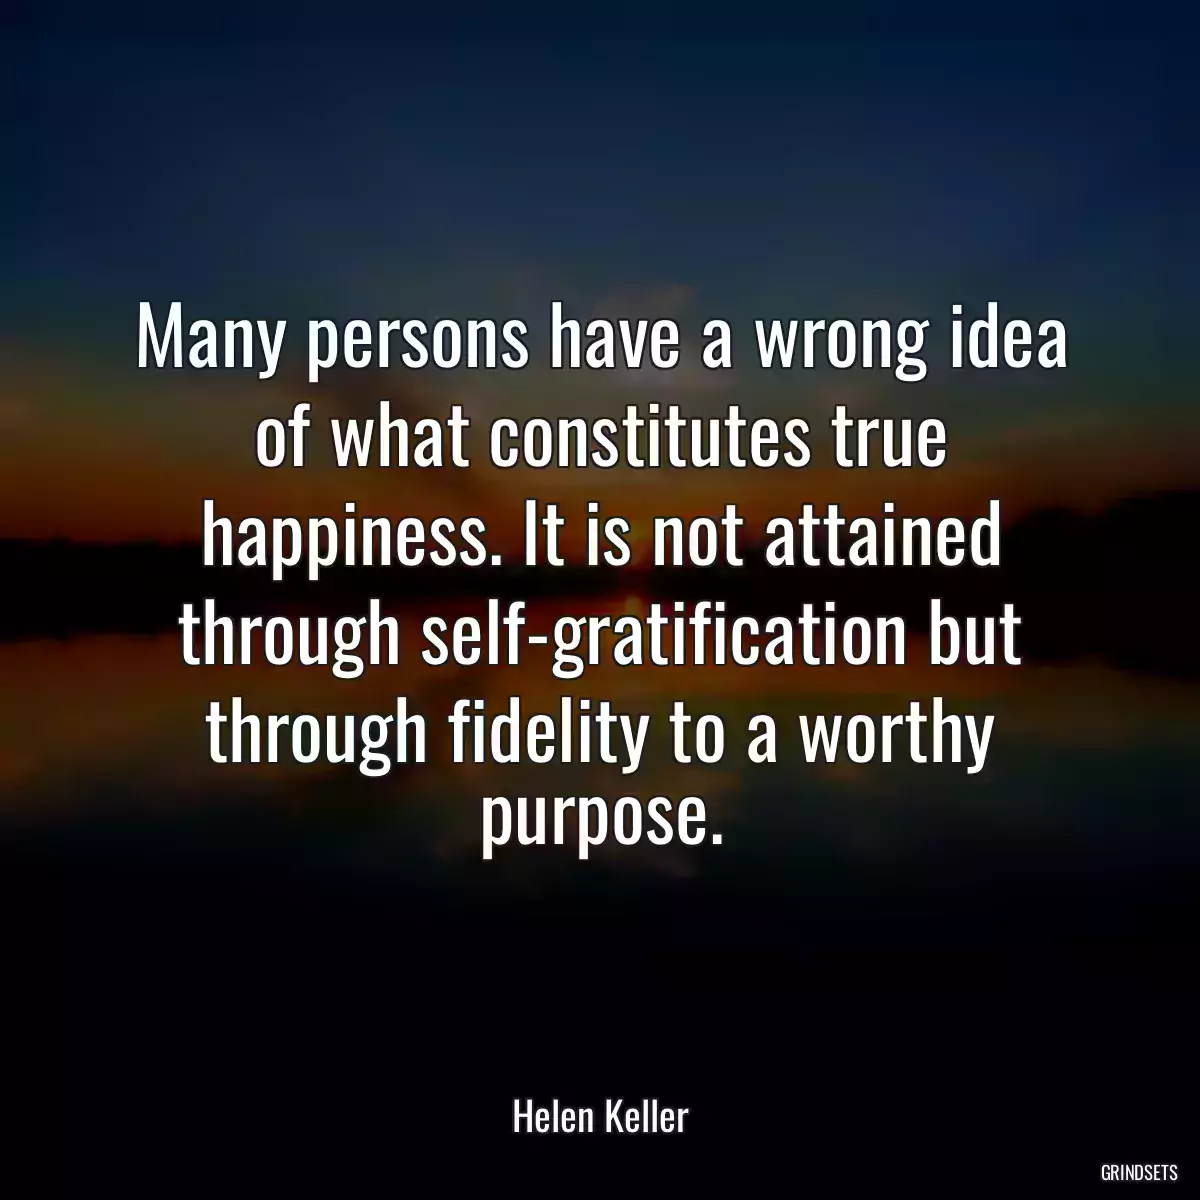 Many persons have a wrong idea of what constitutes true happiness. It is not attained through self-gratification but through fidelity to a worthy purpose.